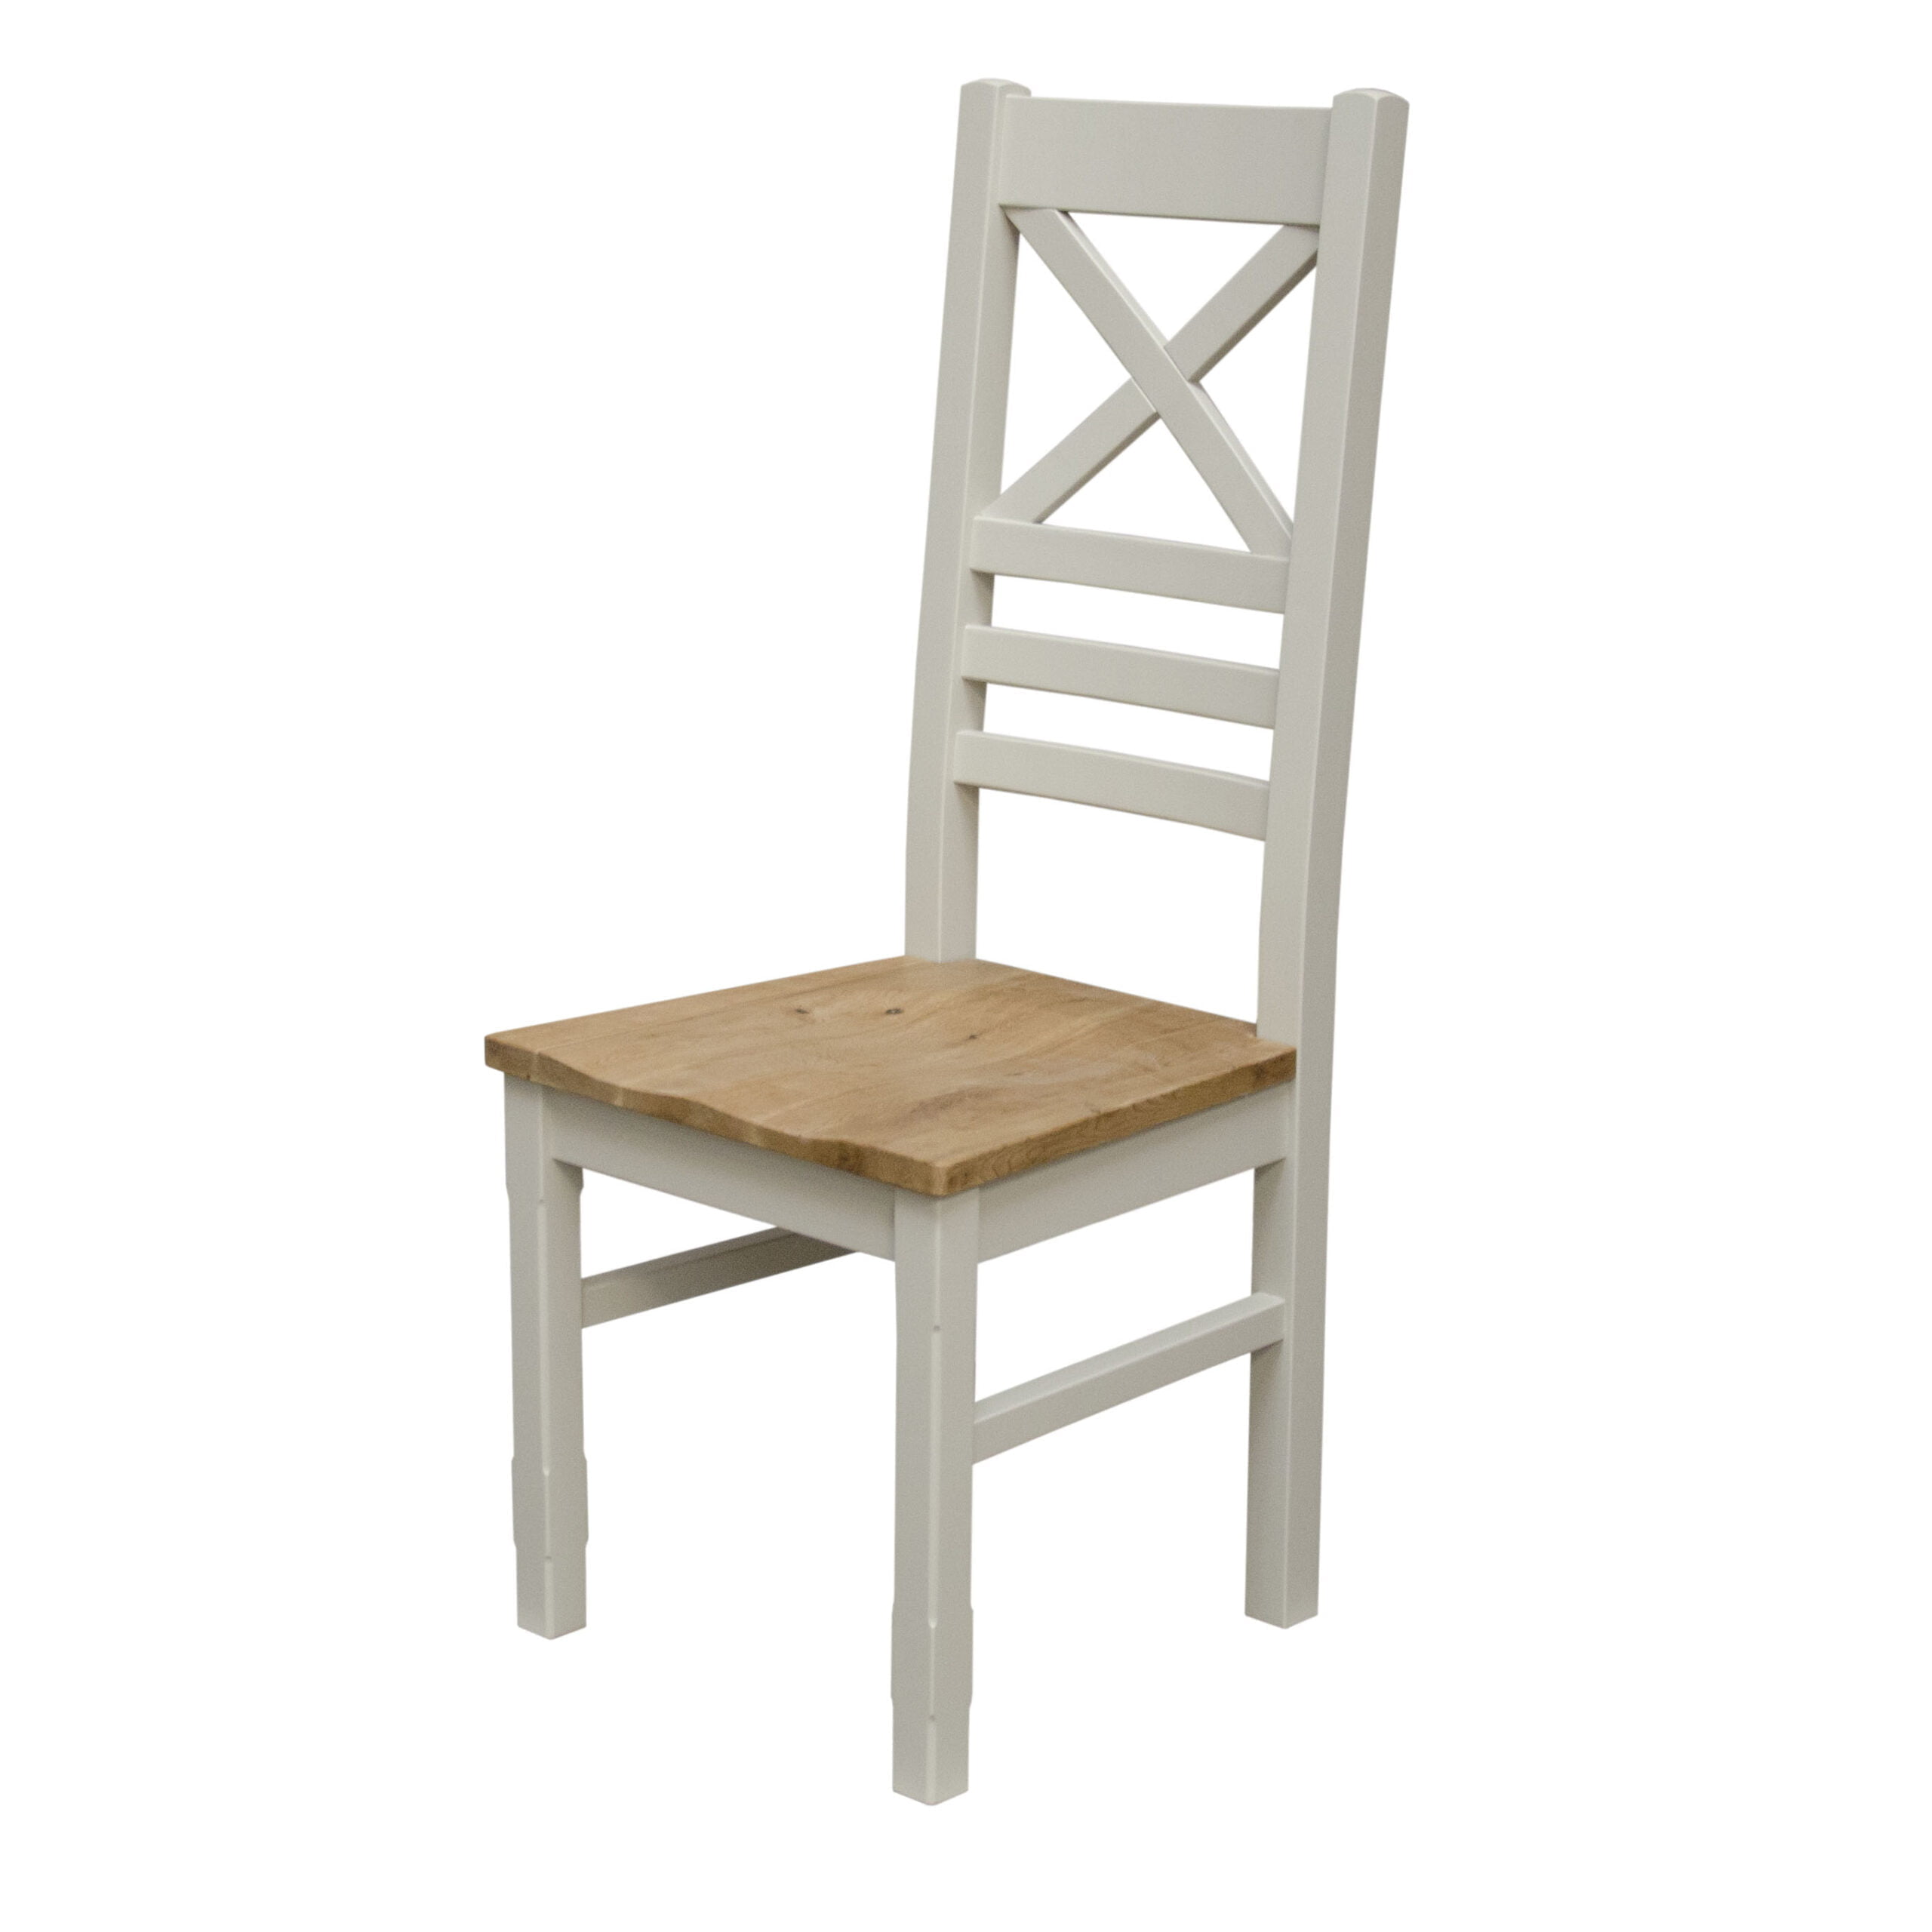 Painted Deluxe newcross chair | Dining Chairs | The Bay Furniture Company